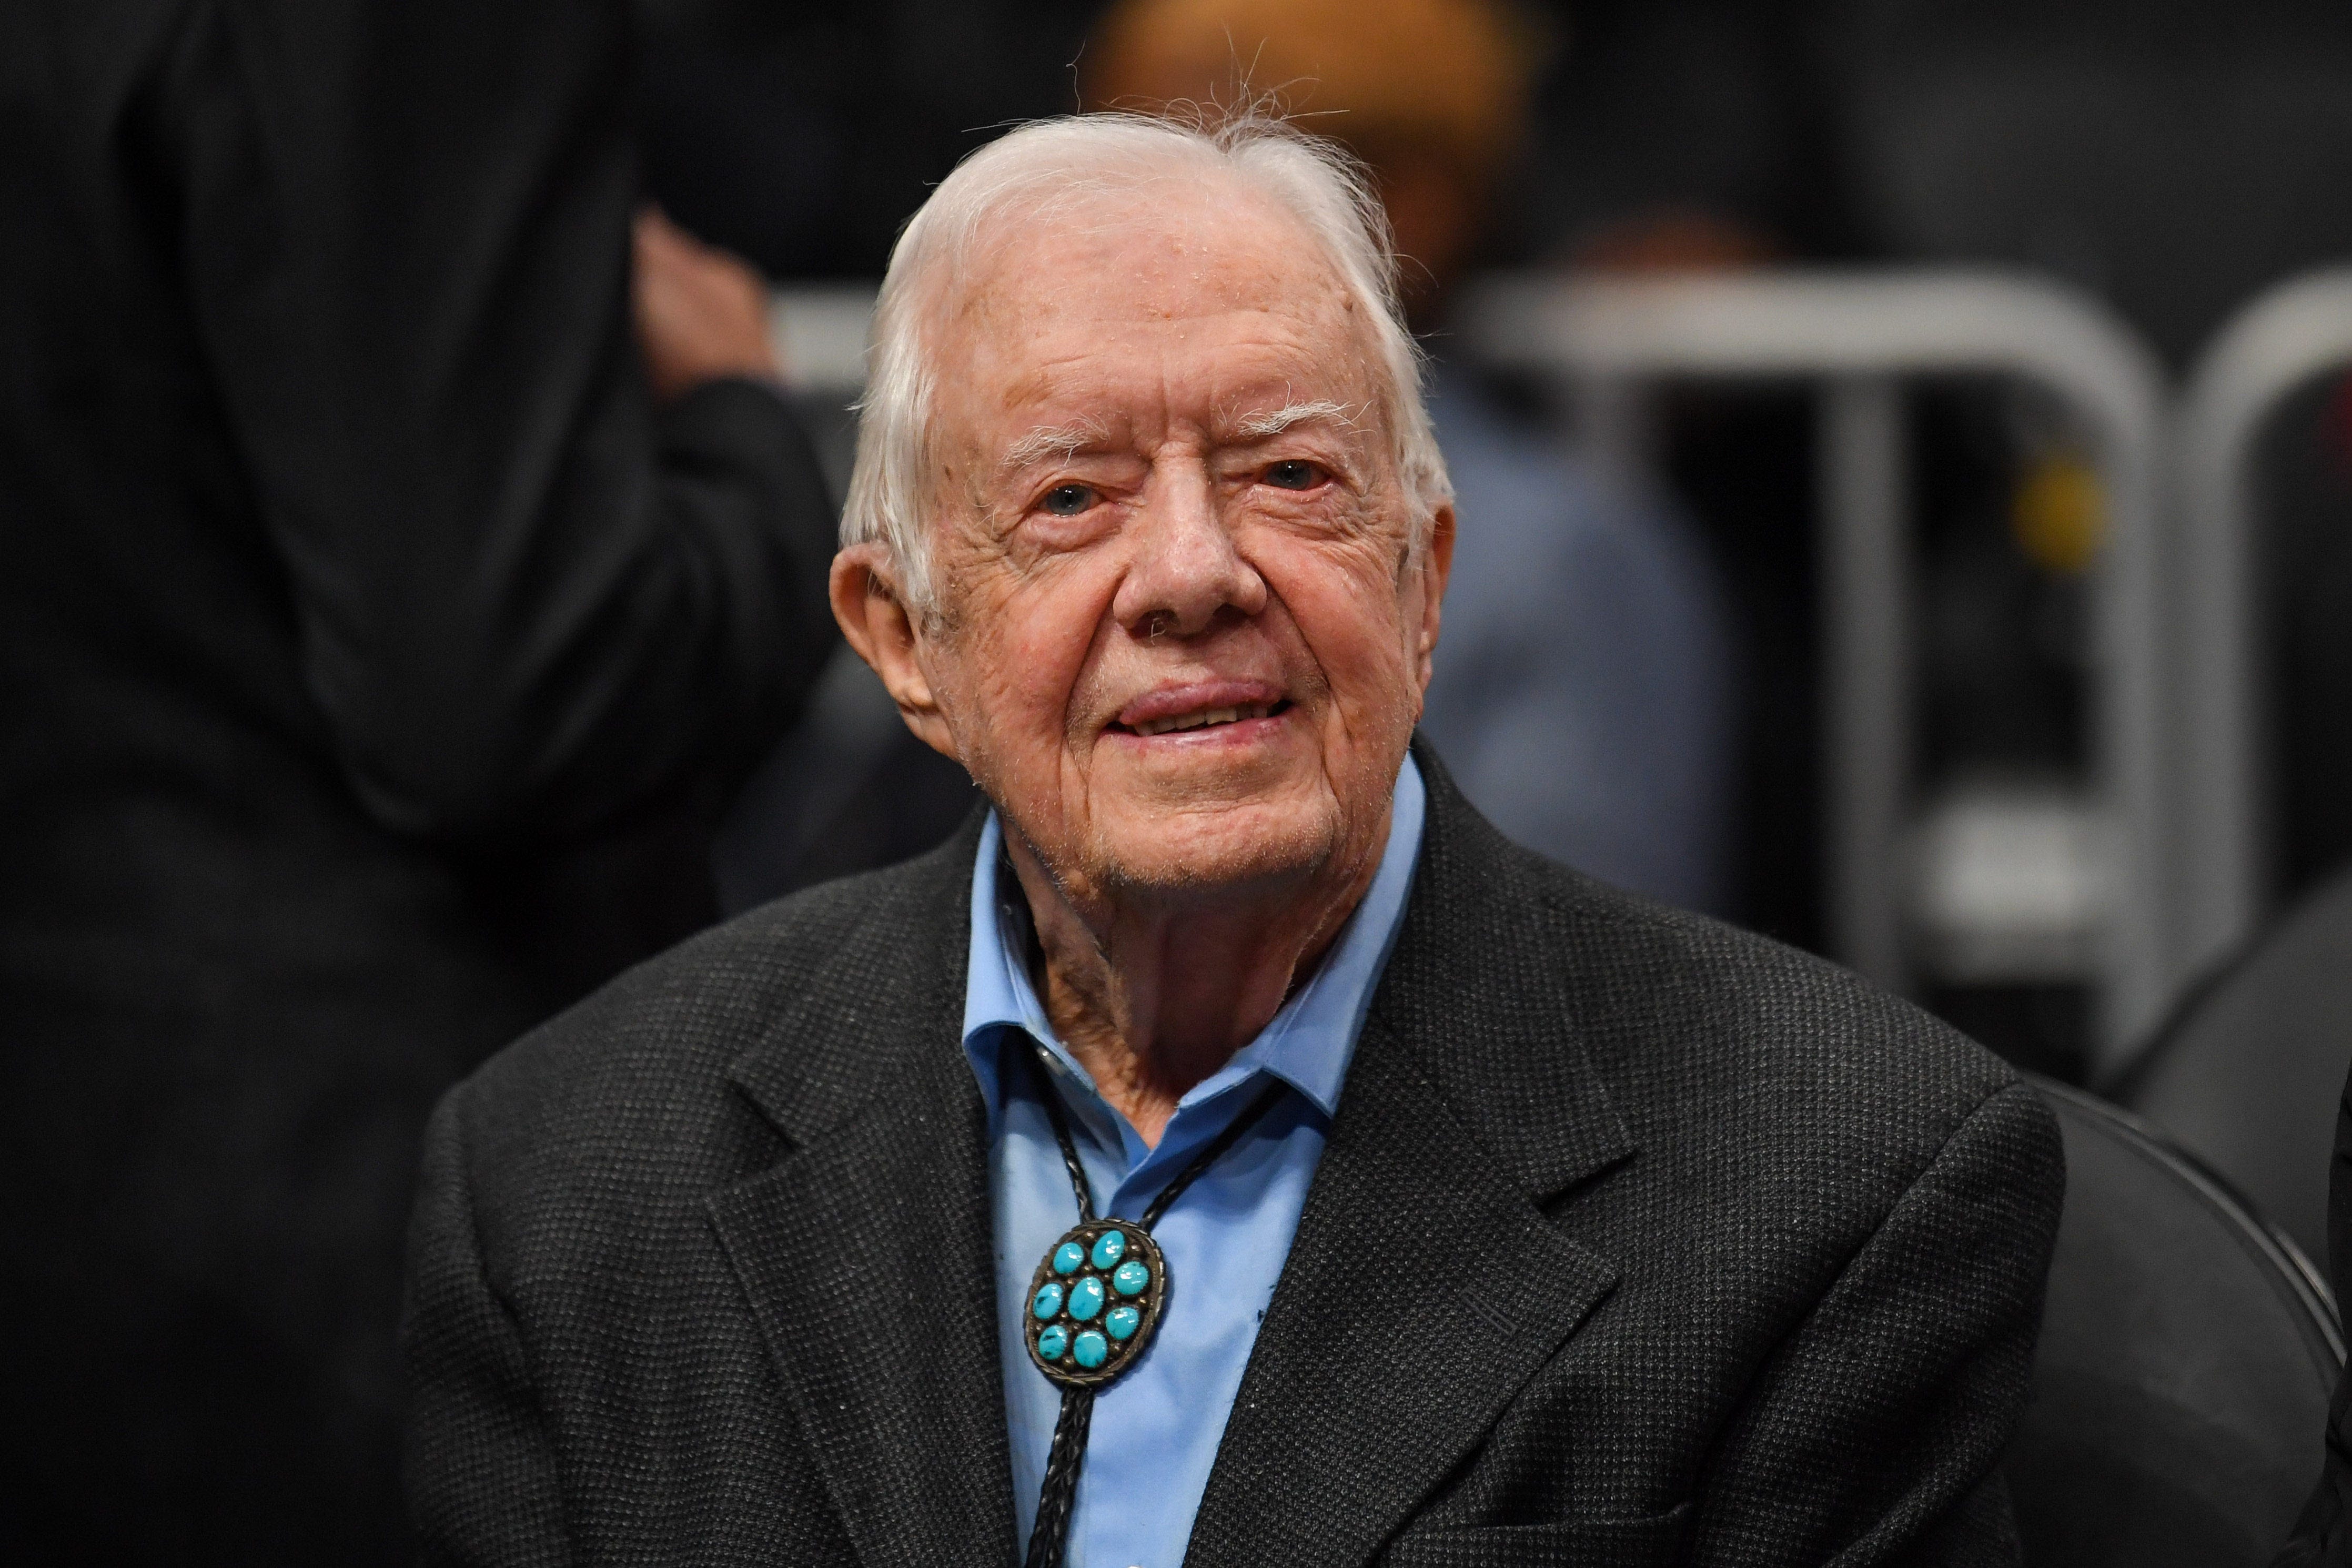 Jimmy Carter celebrating 100th birthday with benefit concert in Atlanta. Here's who will play